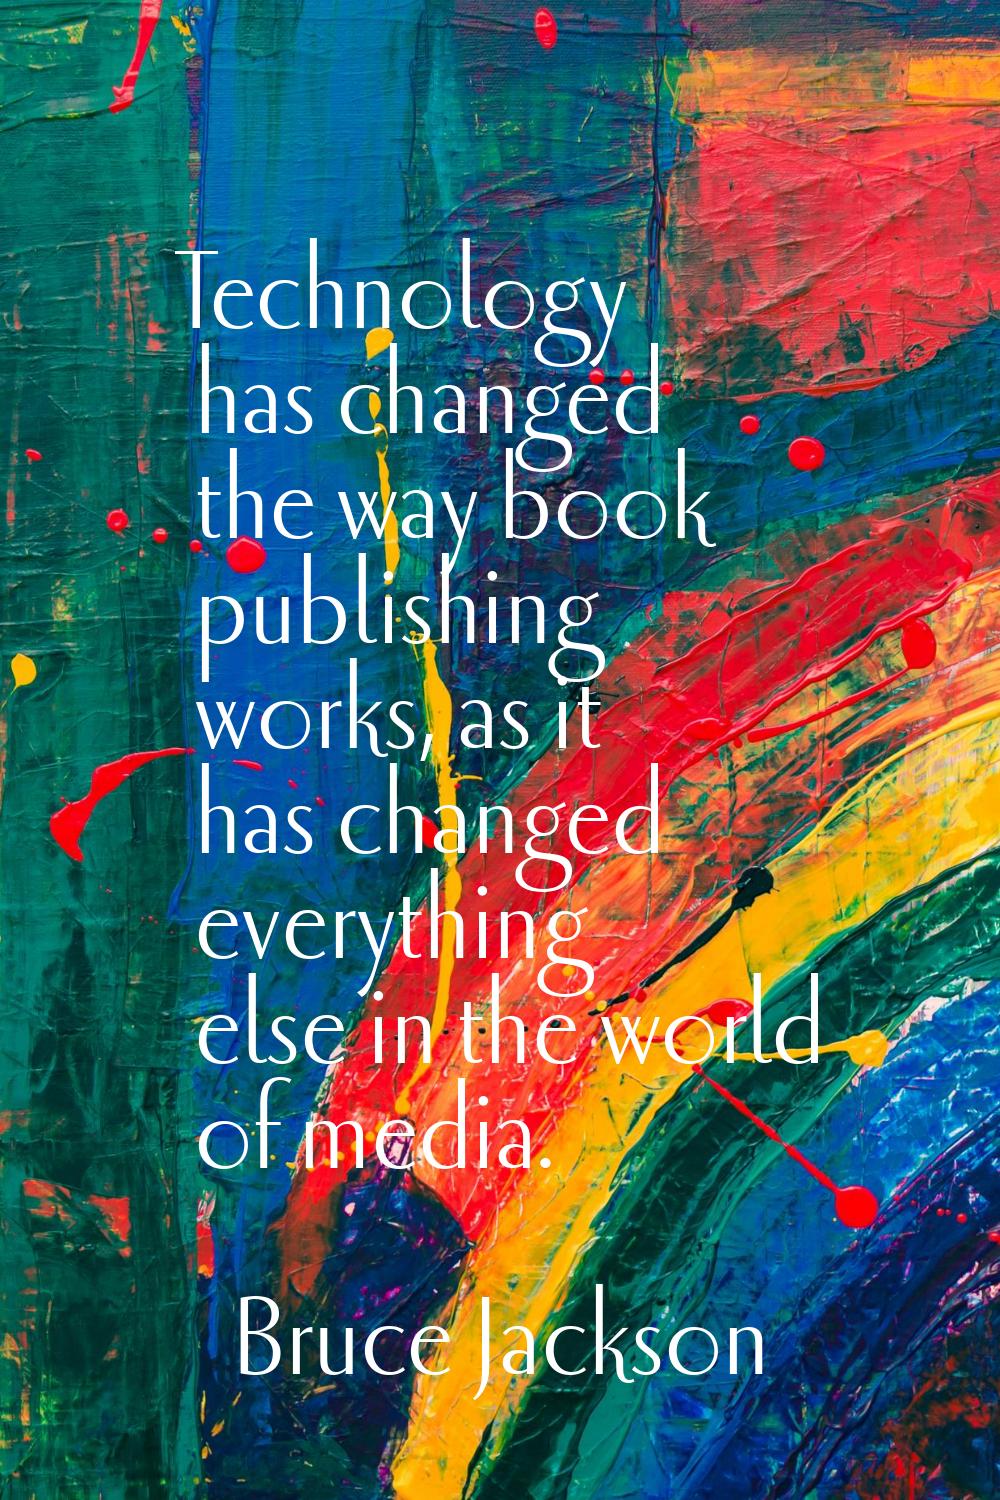 Technology has changed the way book publishing works, as it has changed everything else in the worl